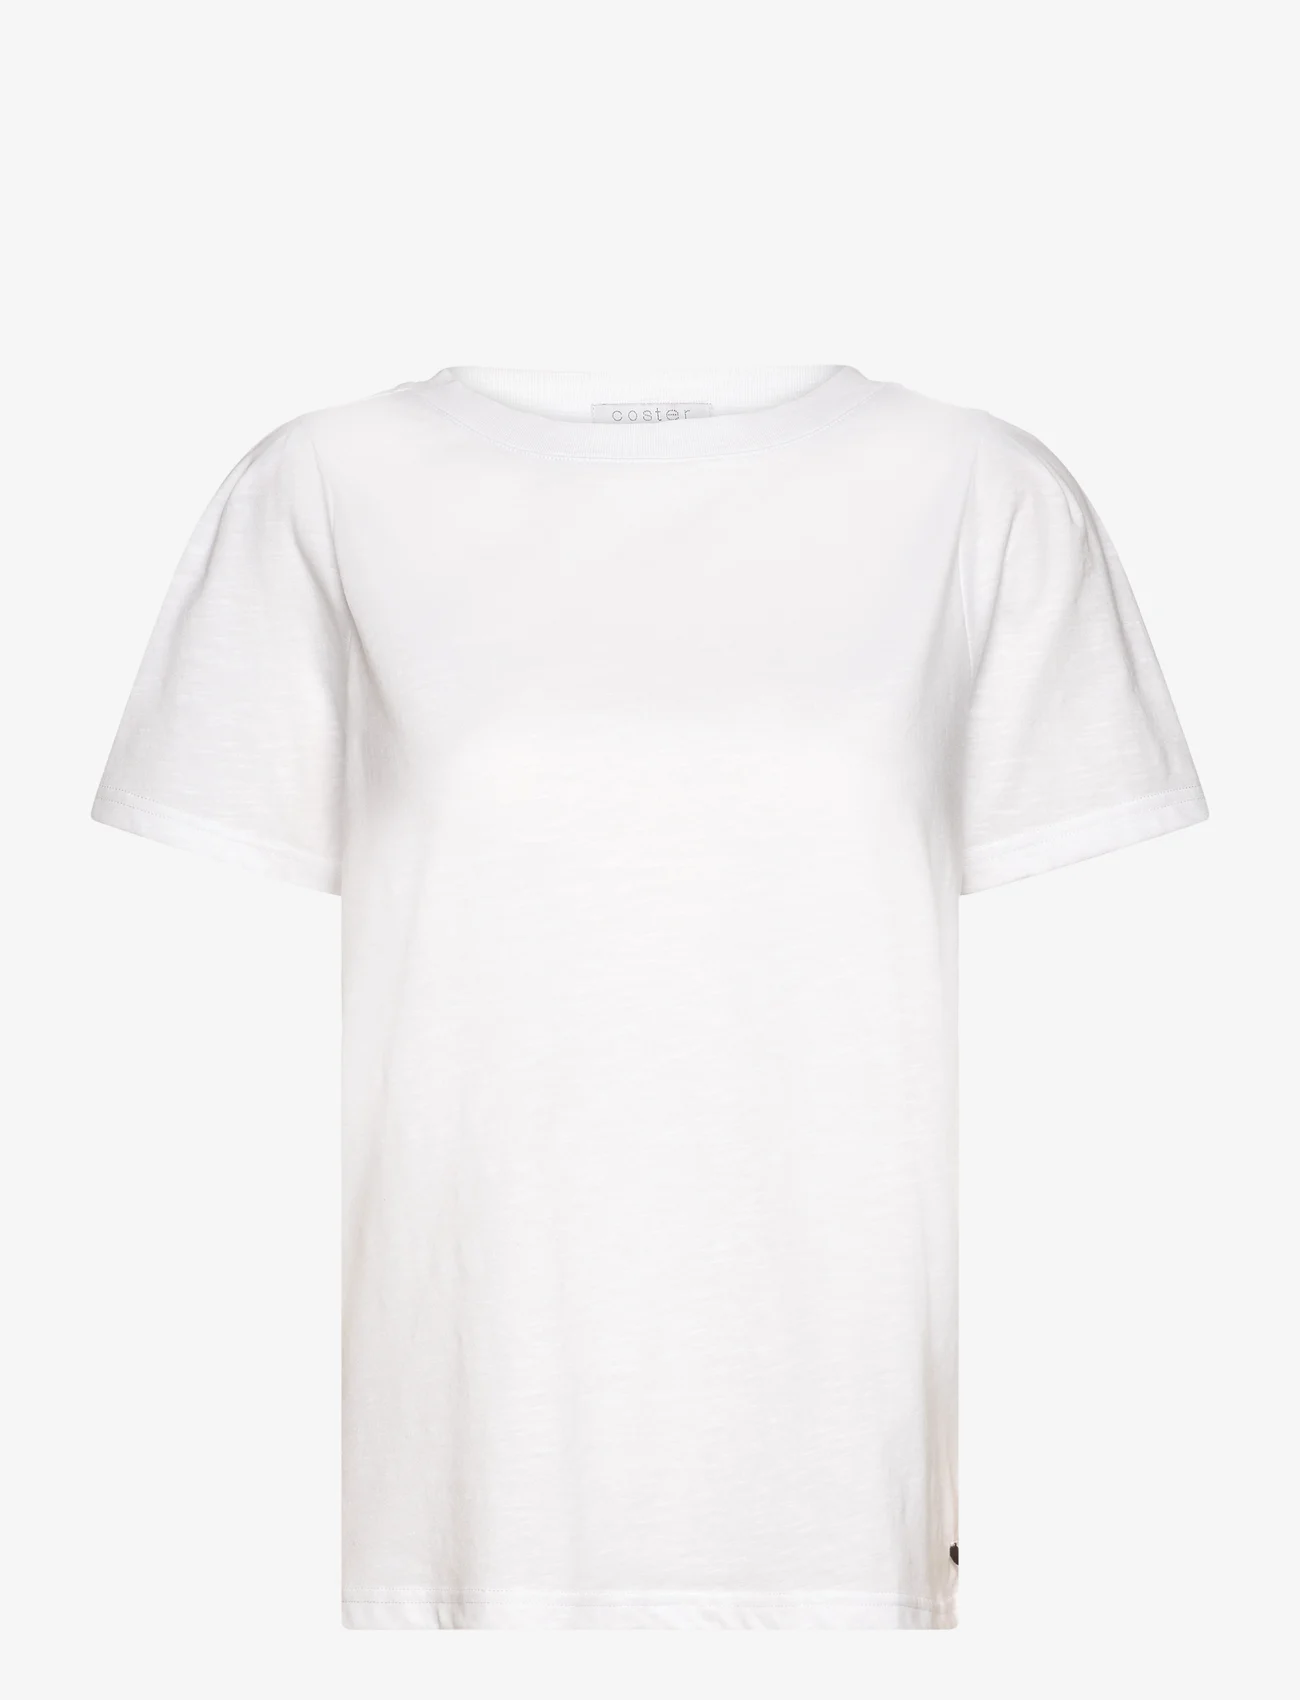 Coster Copenhagen - T-shirt with pleats - lowest prices - white - 0